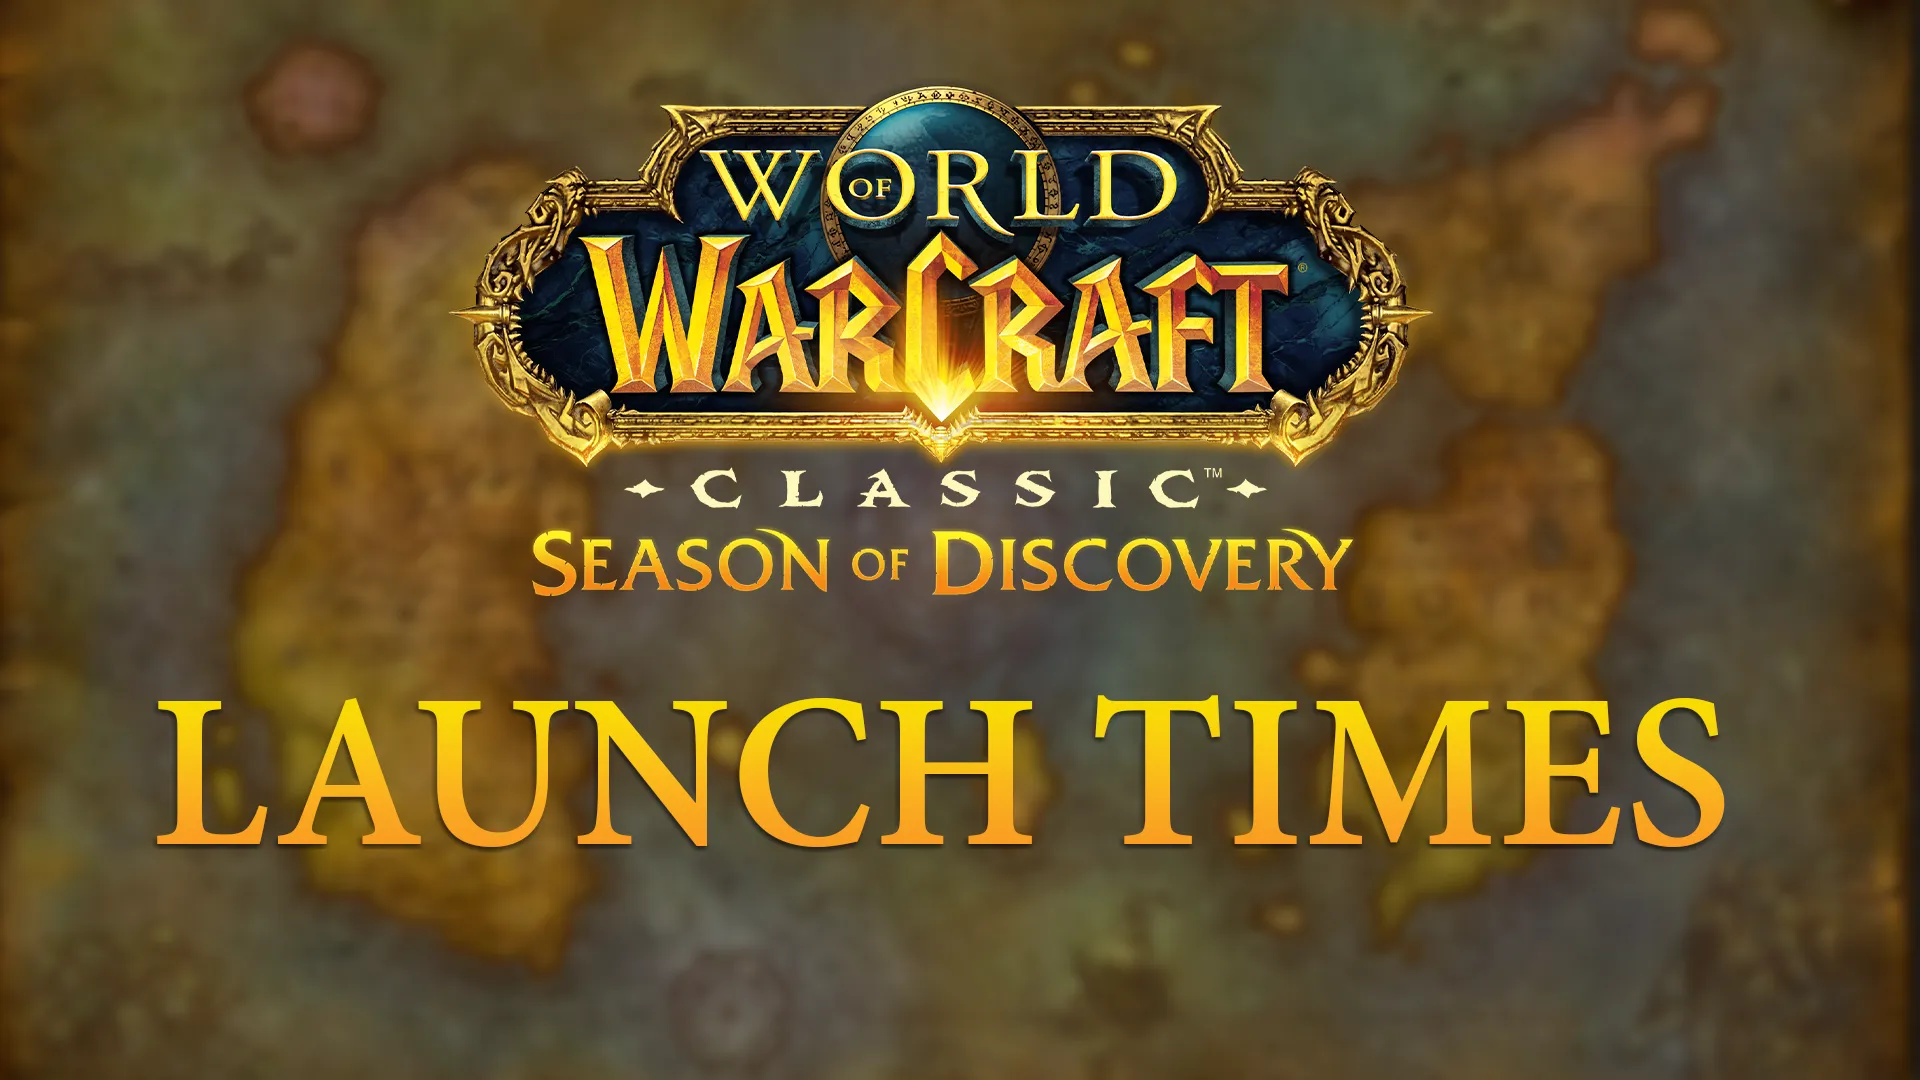 World of Warcraft Classic Season of Discovery is Now Live